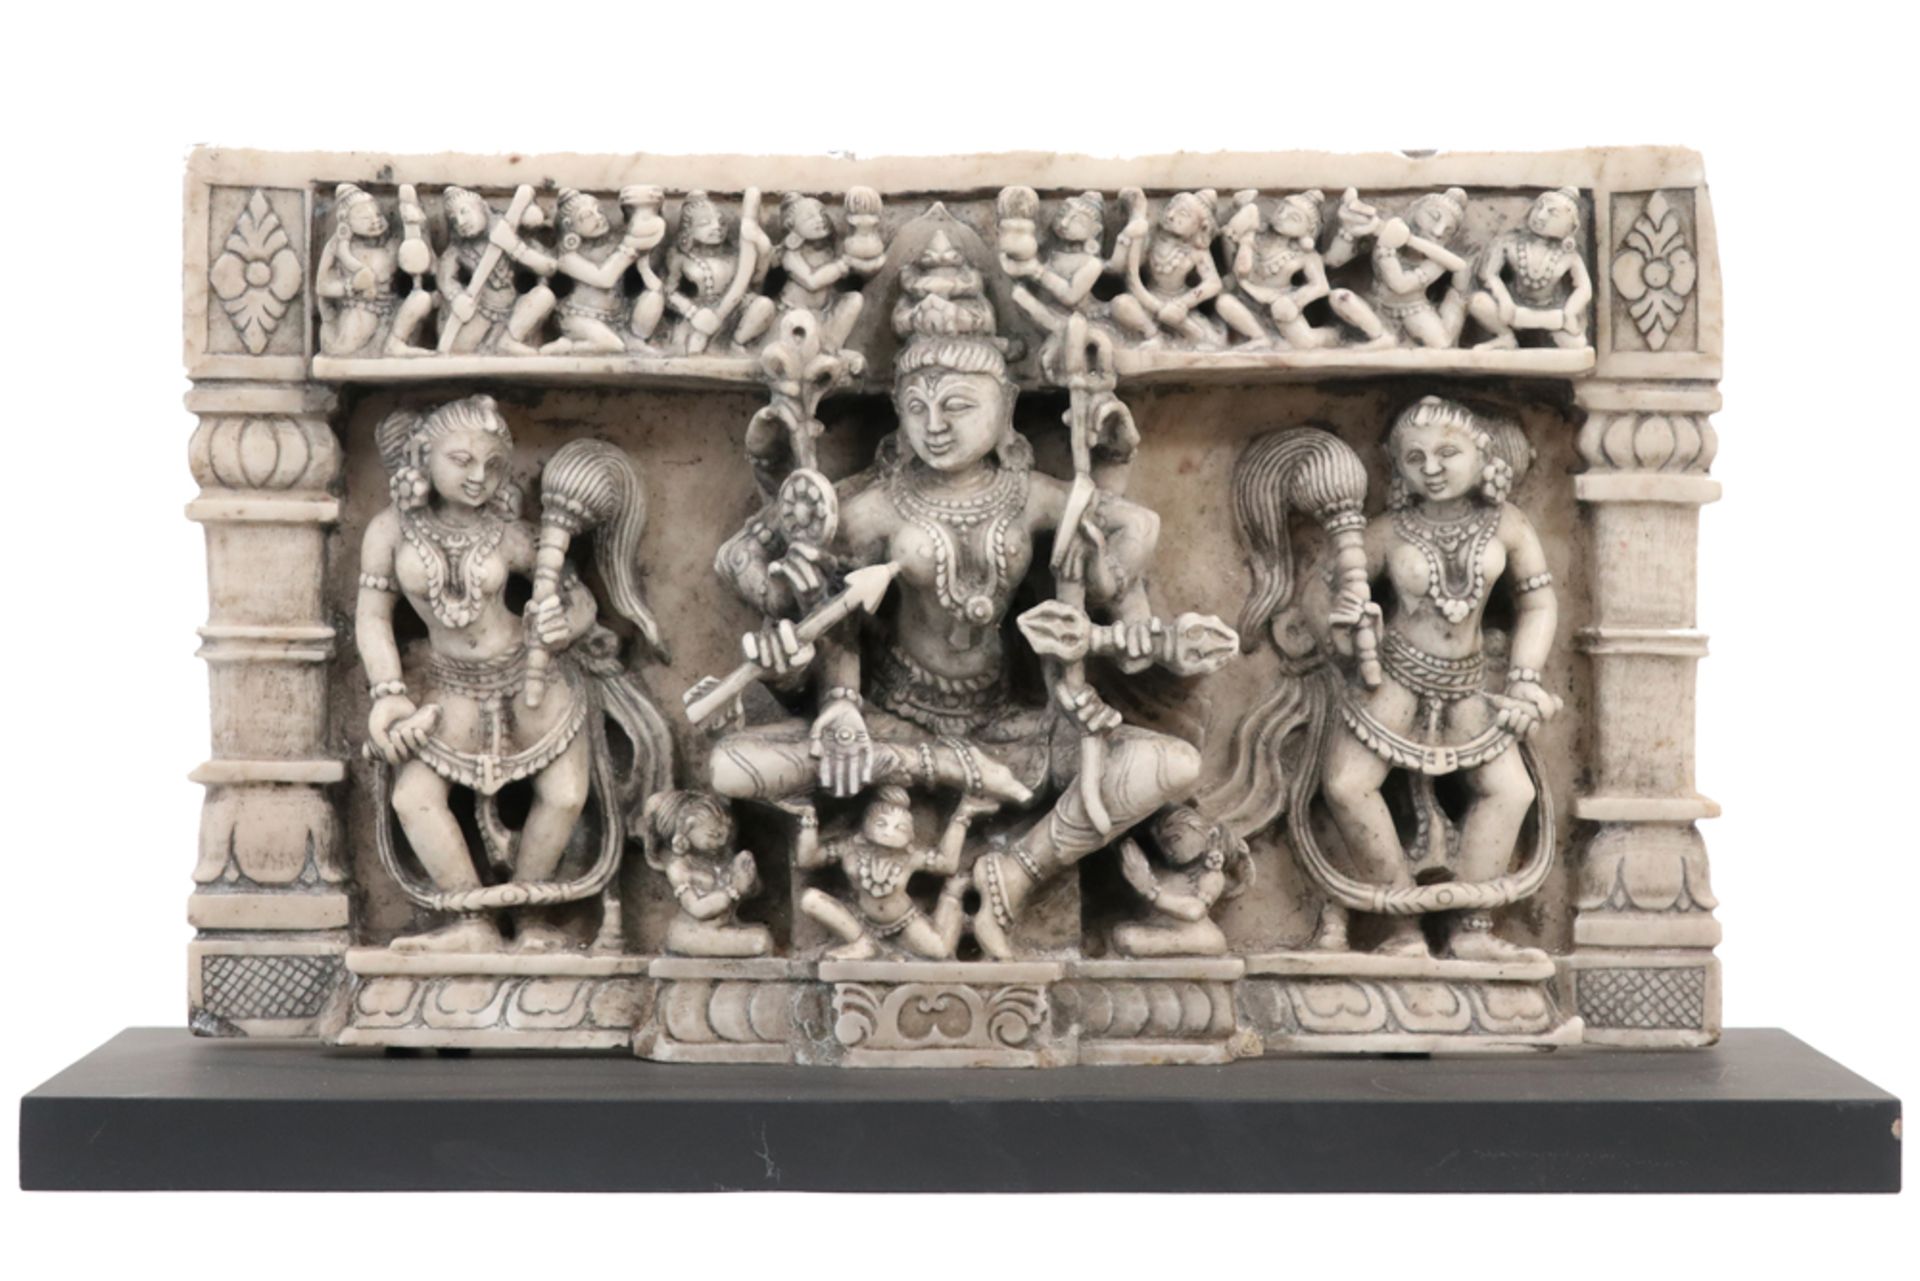 12th Cent. northern Indian white marble sculpture with a finely sculpted frieze with Durga